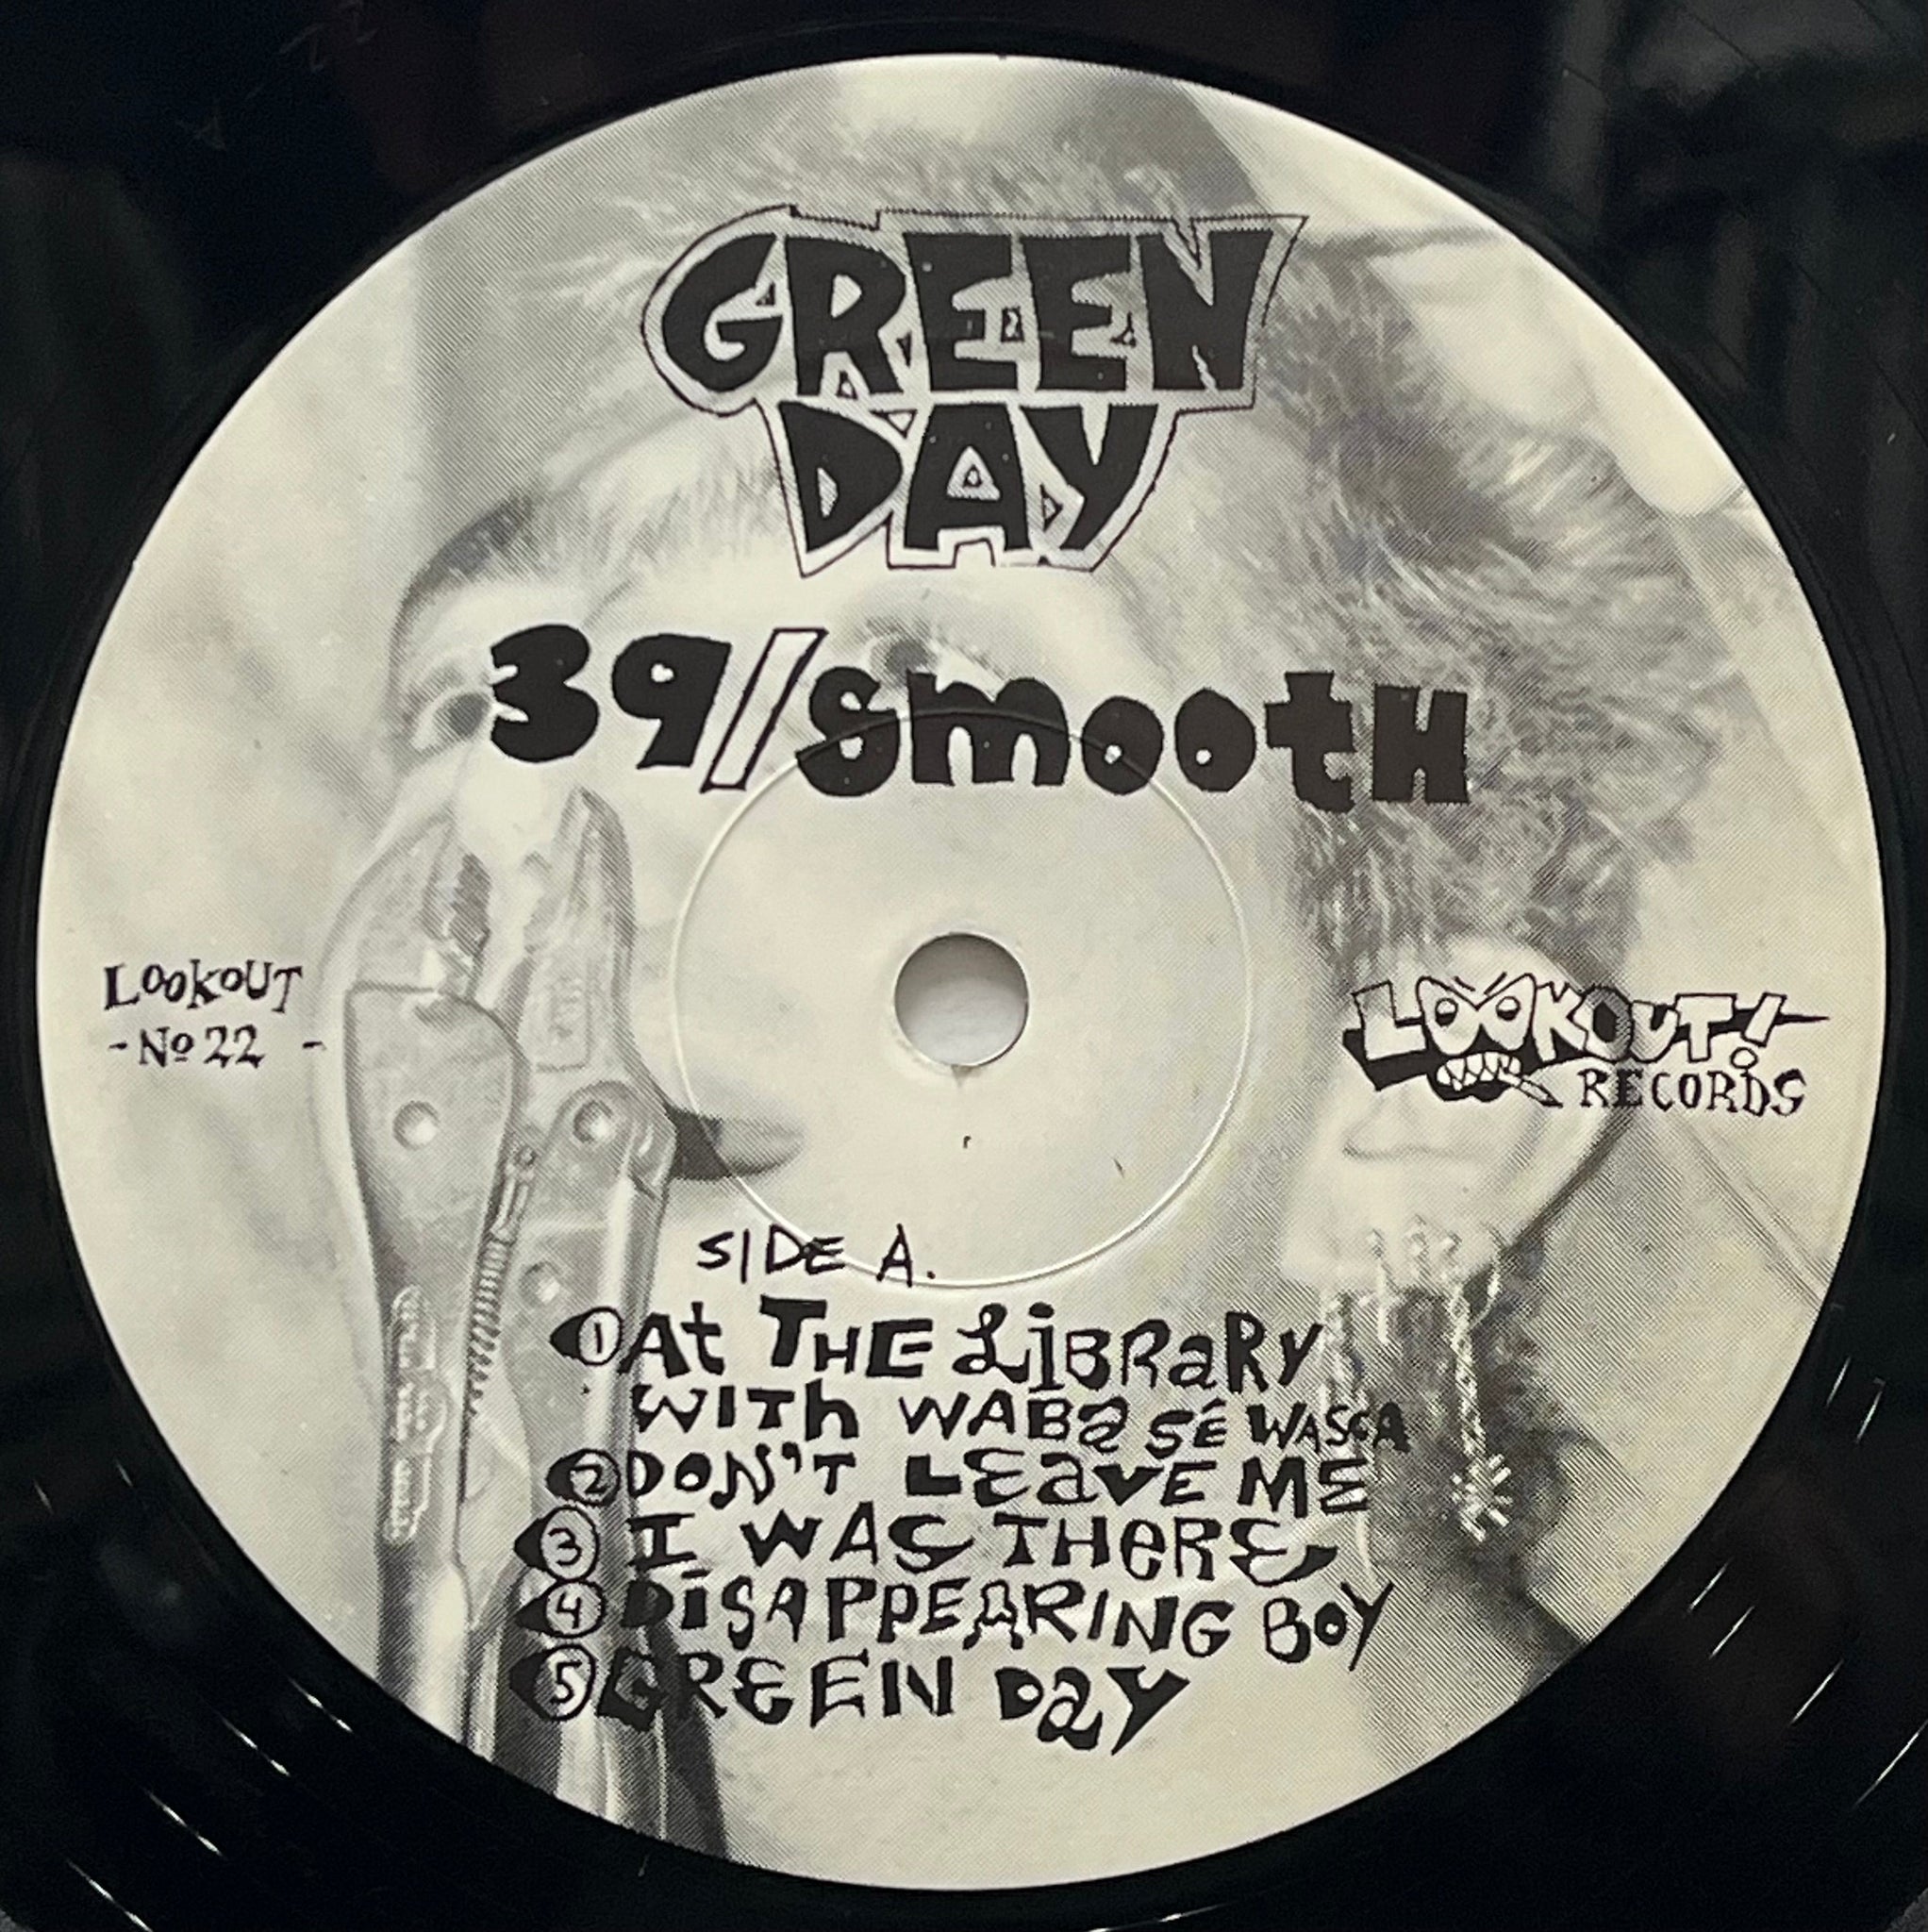 GREEN DAY / 39/Smooth (Lookout! Records – No. 22, LP) – TICRO MARKET